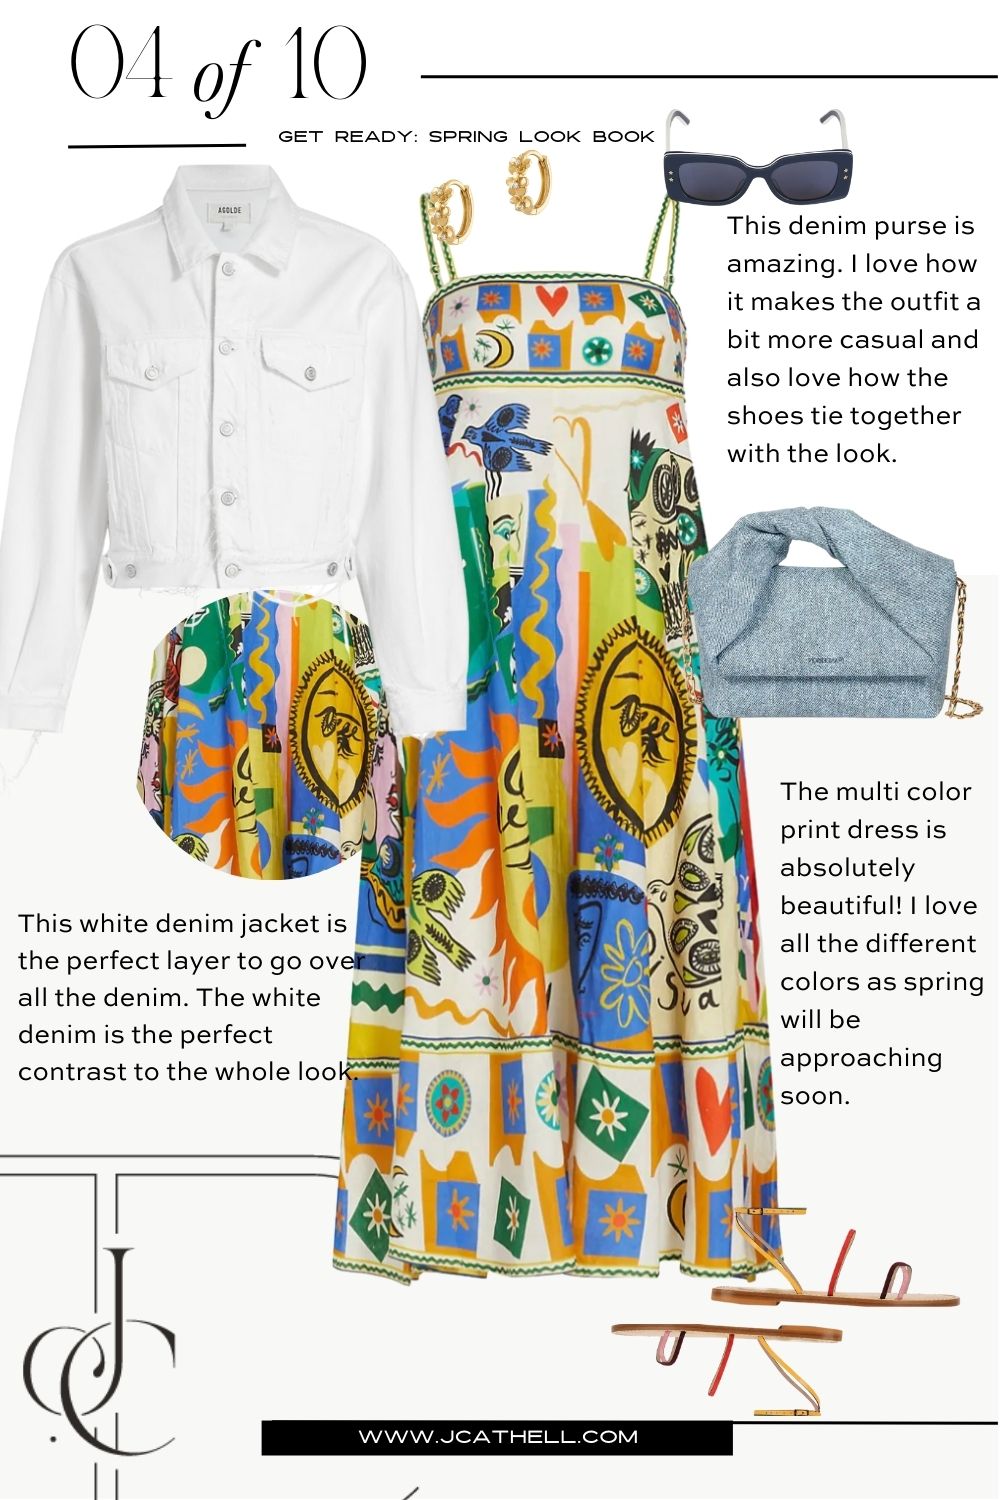 Enjoy my Spring Look Book with SAKS Fifth Avenue - J. Cathell